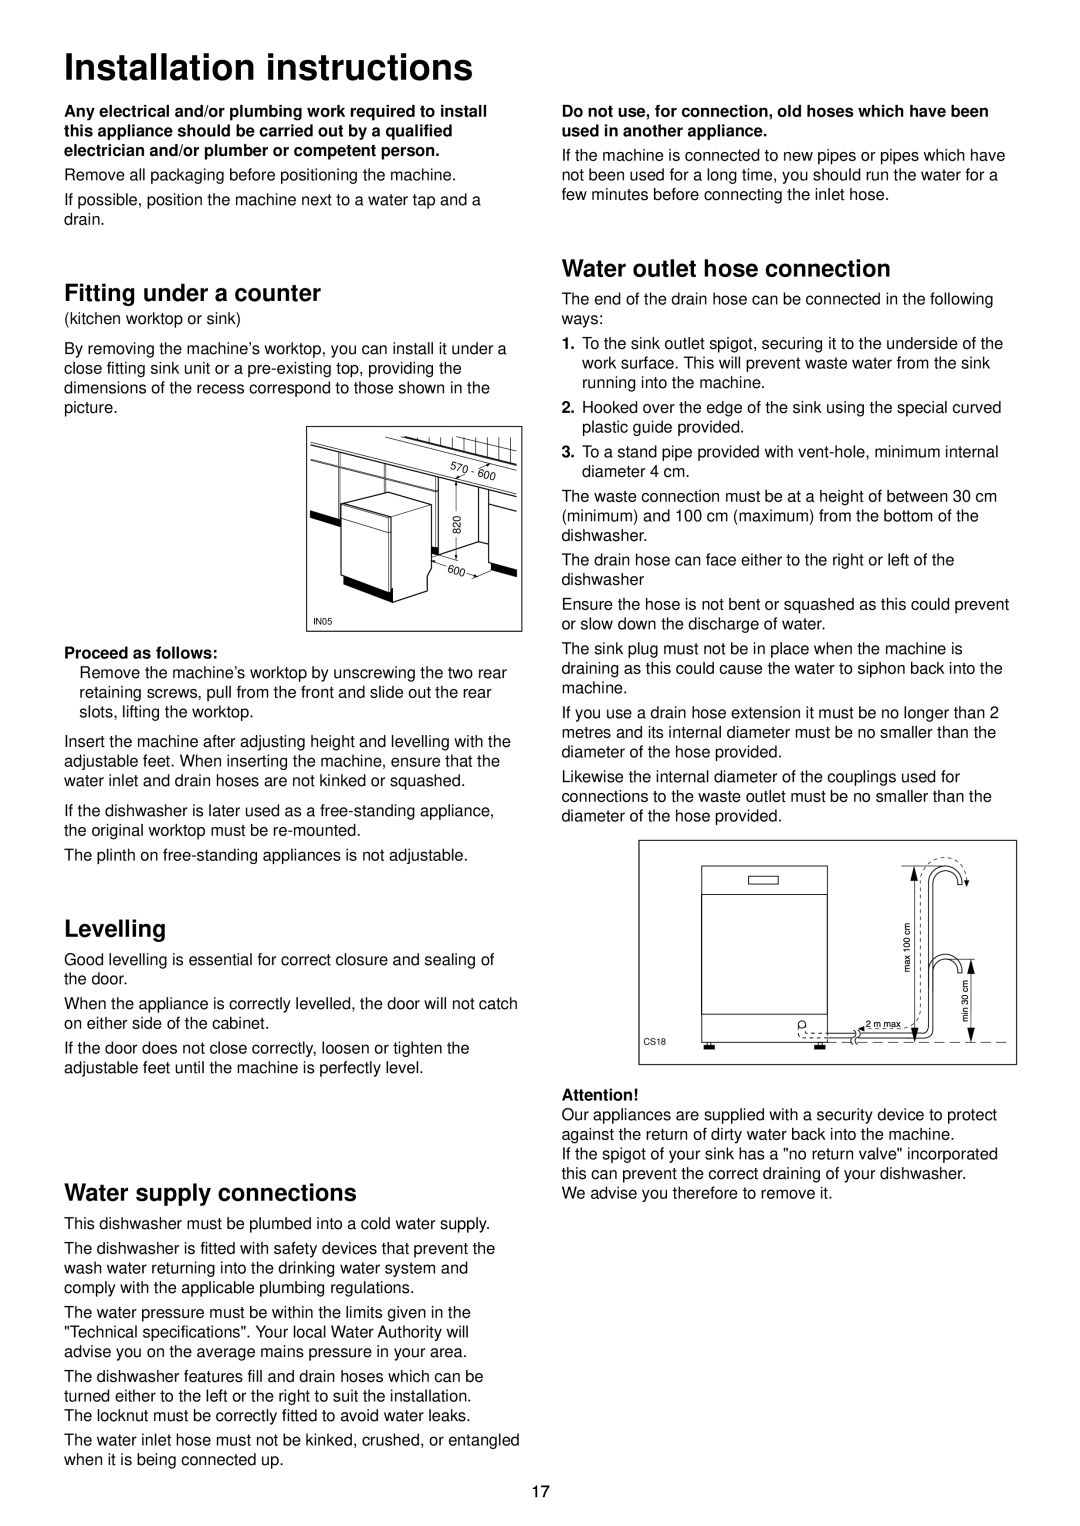 Zanussi DE 6854 manual Installation instructions, Fitting under a counter, Levelling, Water supply connections 